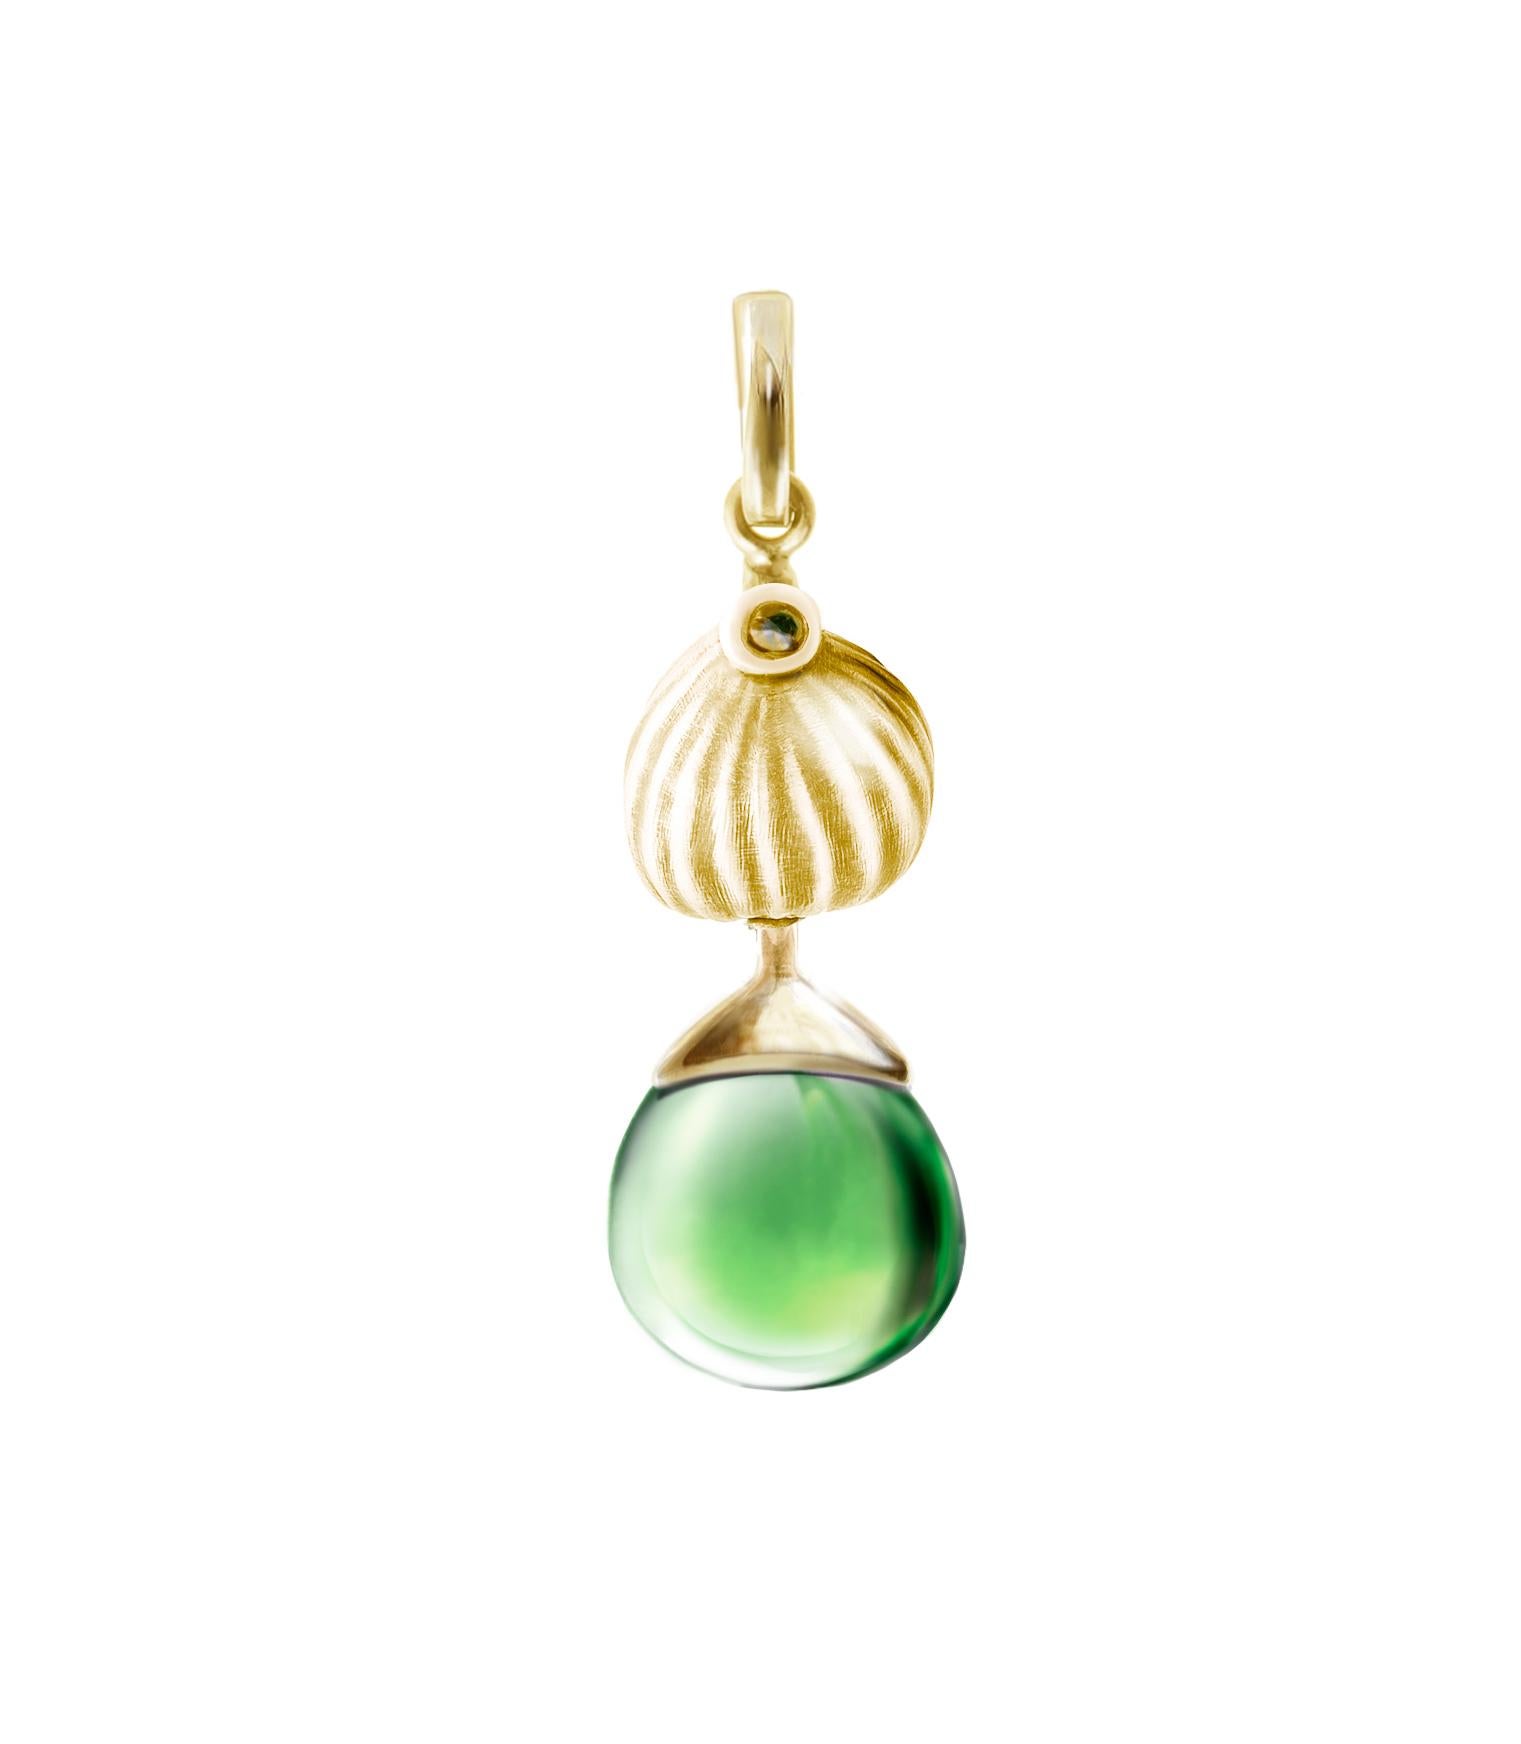 Yellow Gold Drop Pendant Necklace with Green Quartz by the Artist For Sale 1